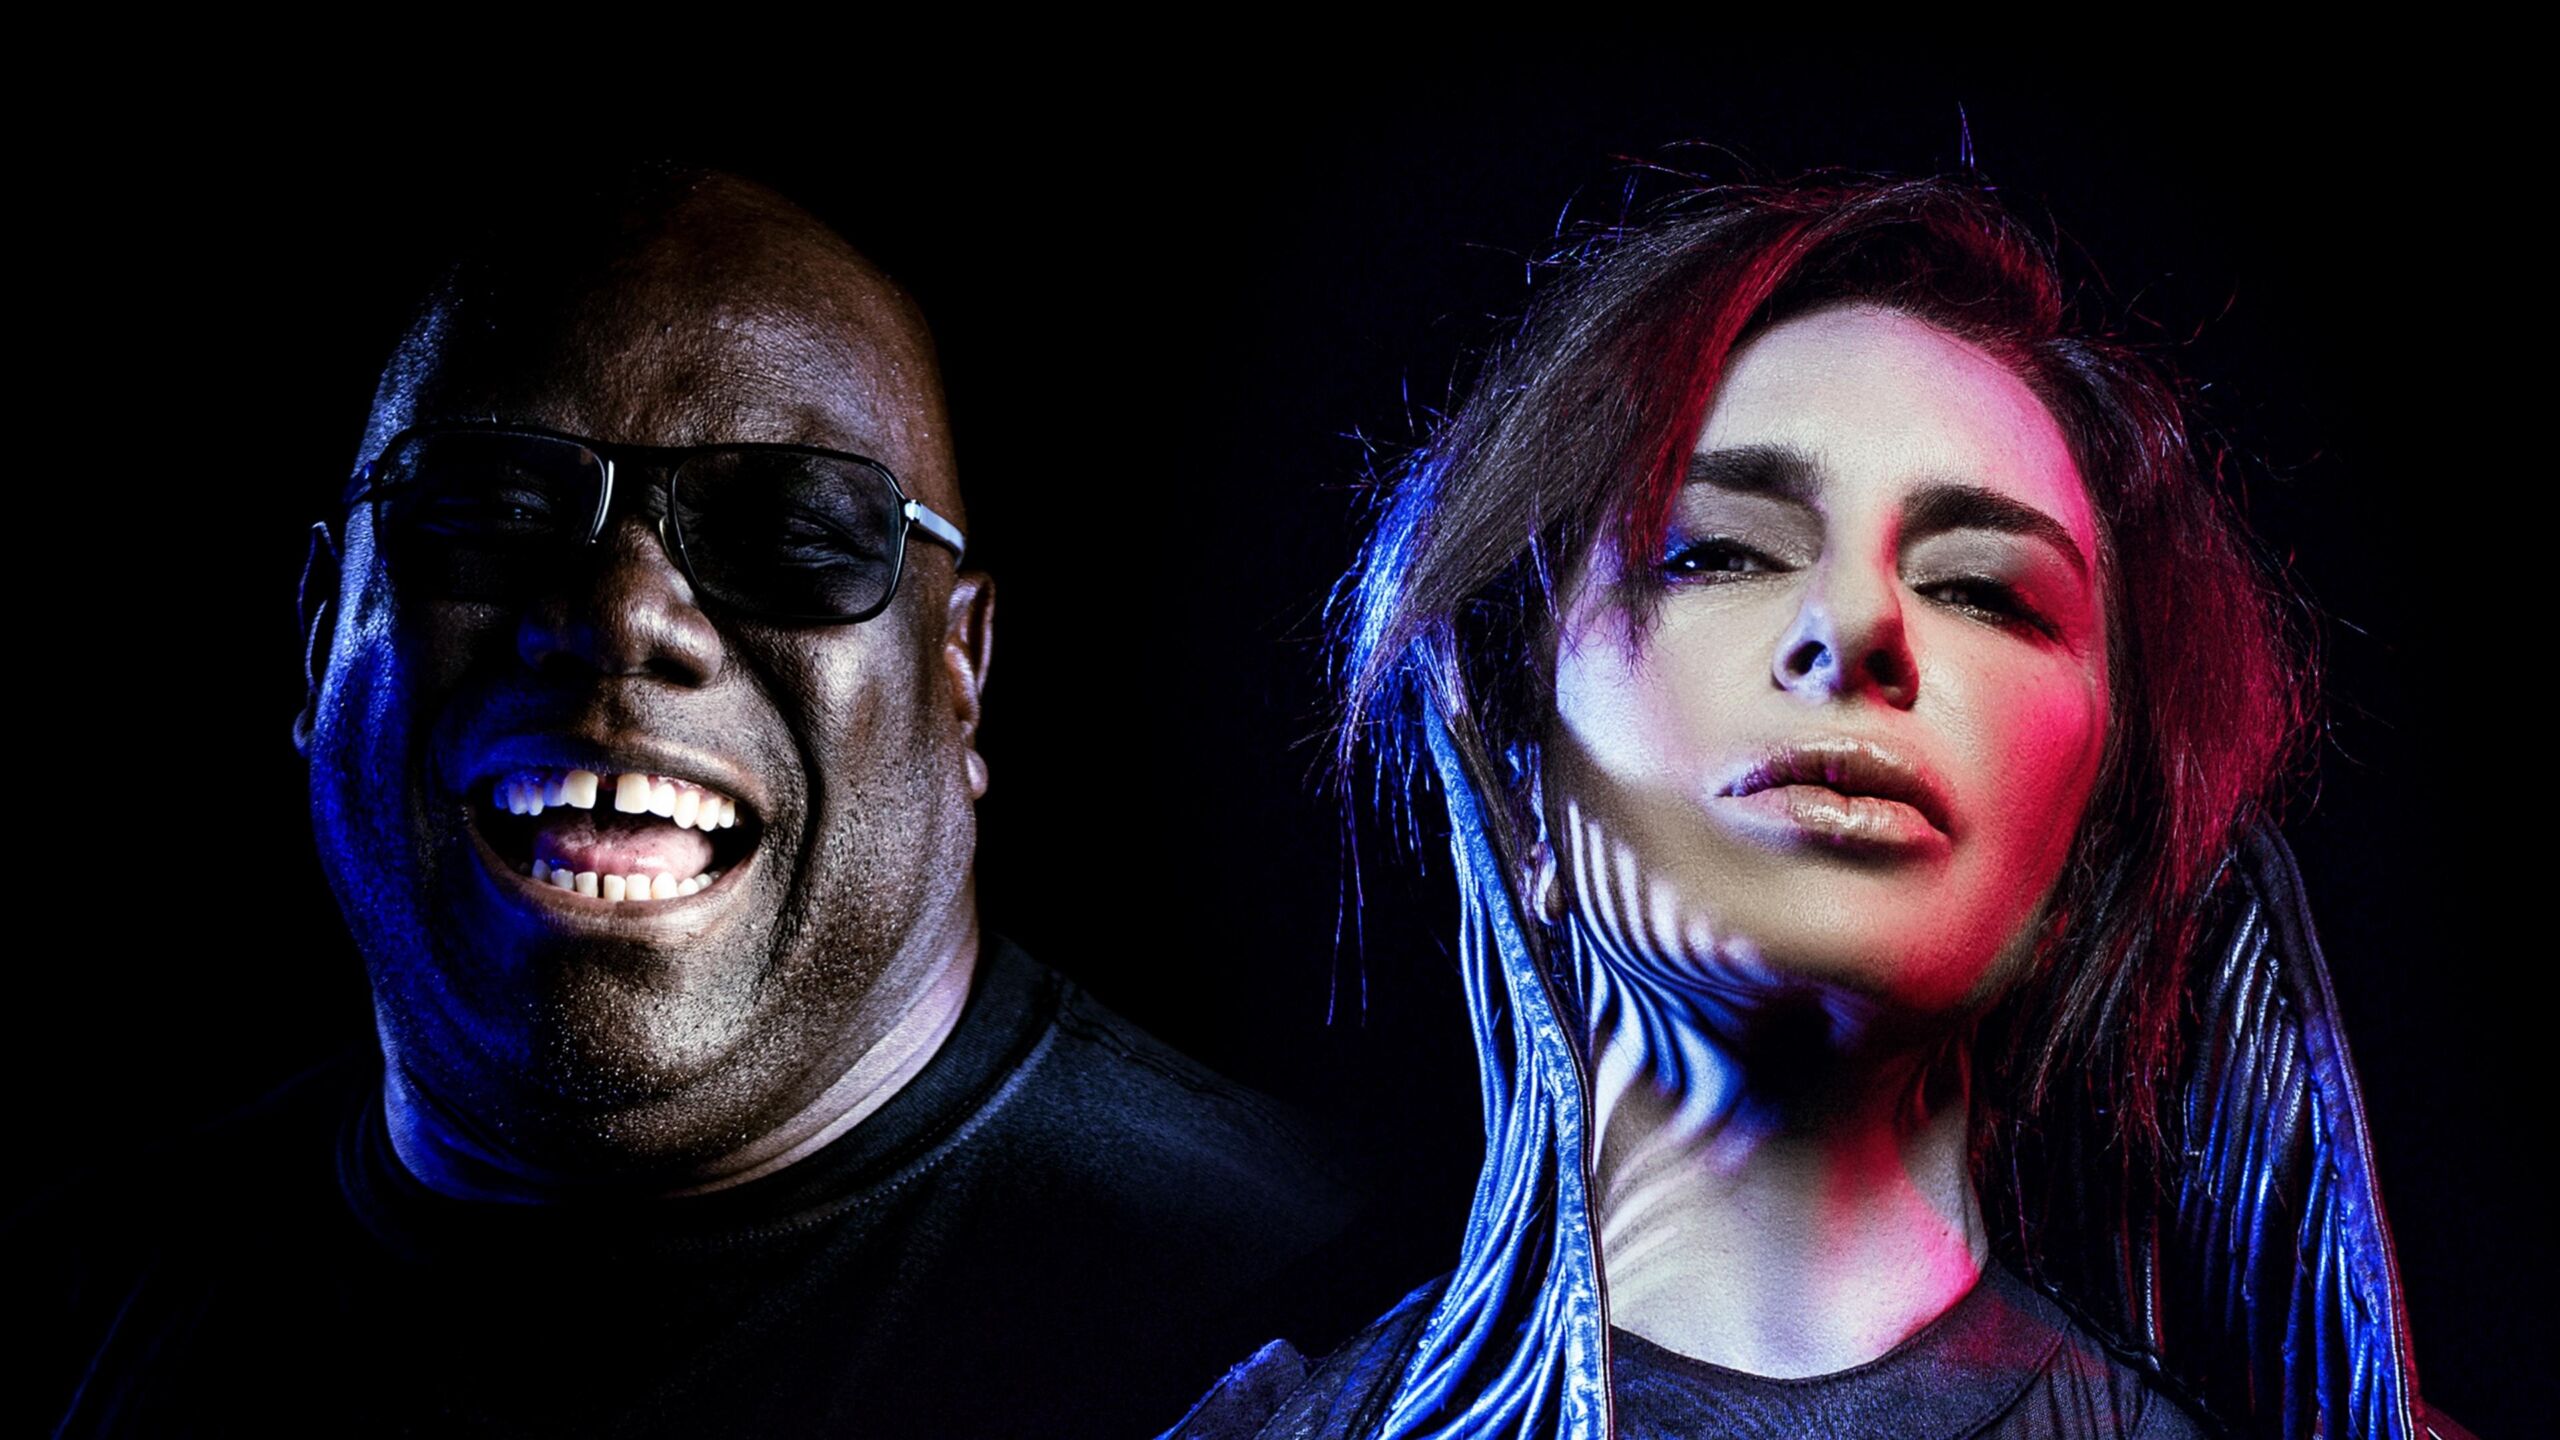 Carl Cox Confirms Details Of His New Album: 'Electronic Generations' Out September  Via Bmg 